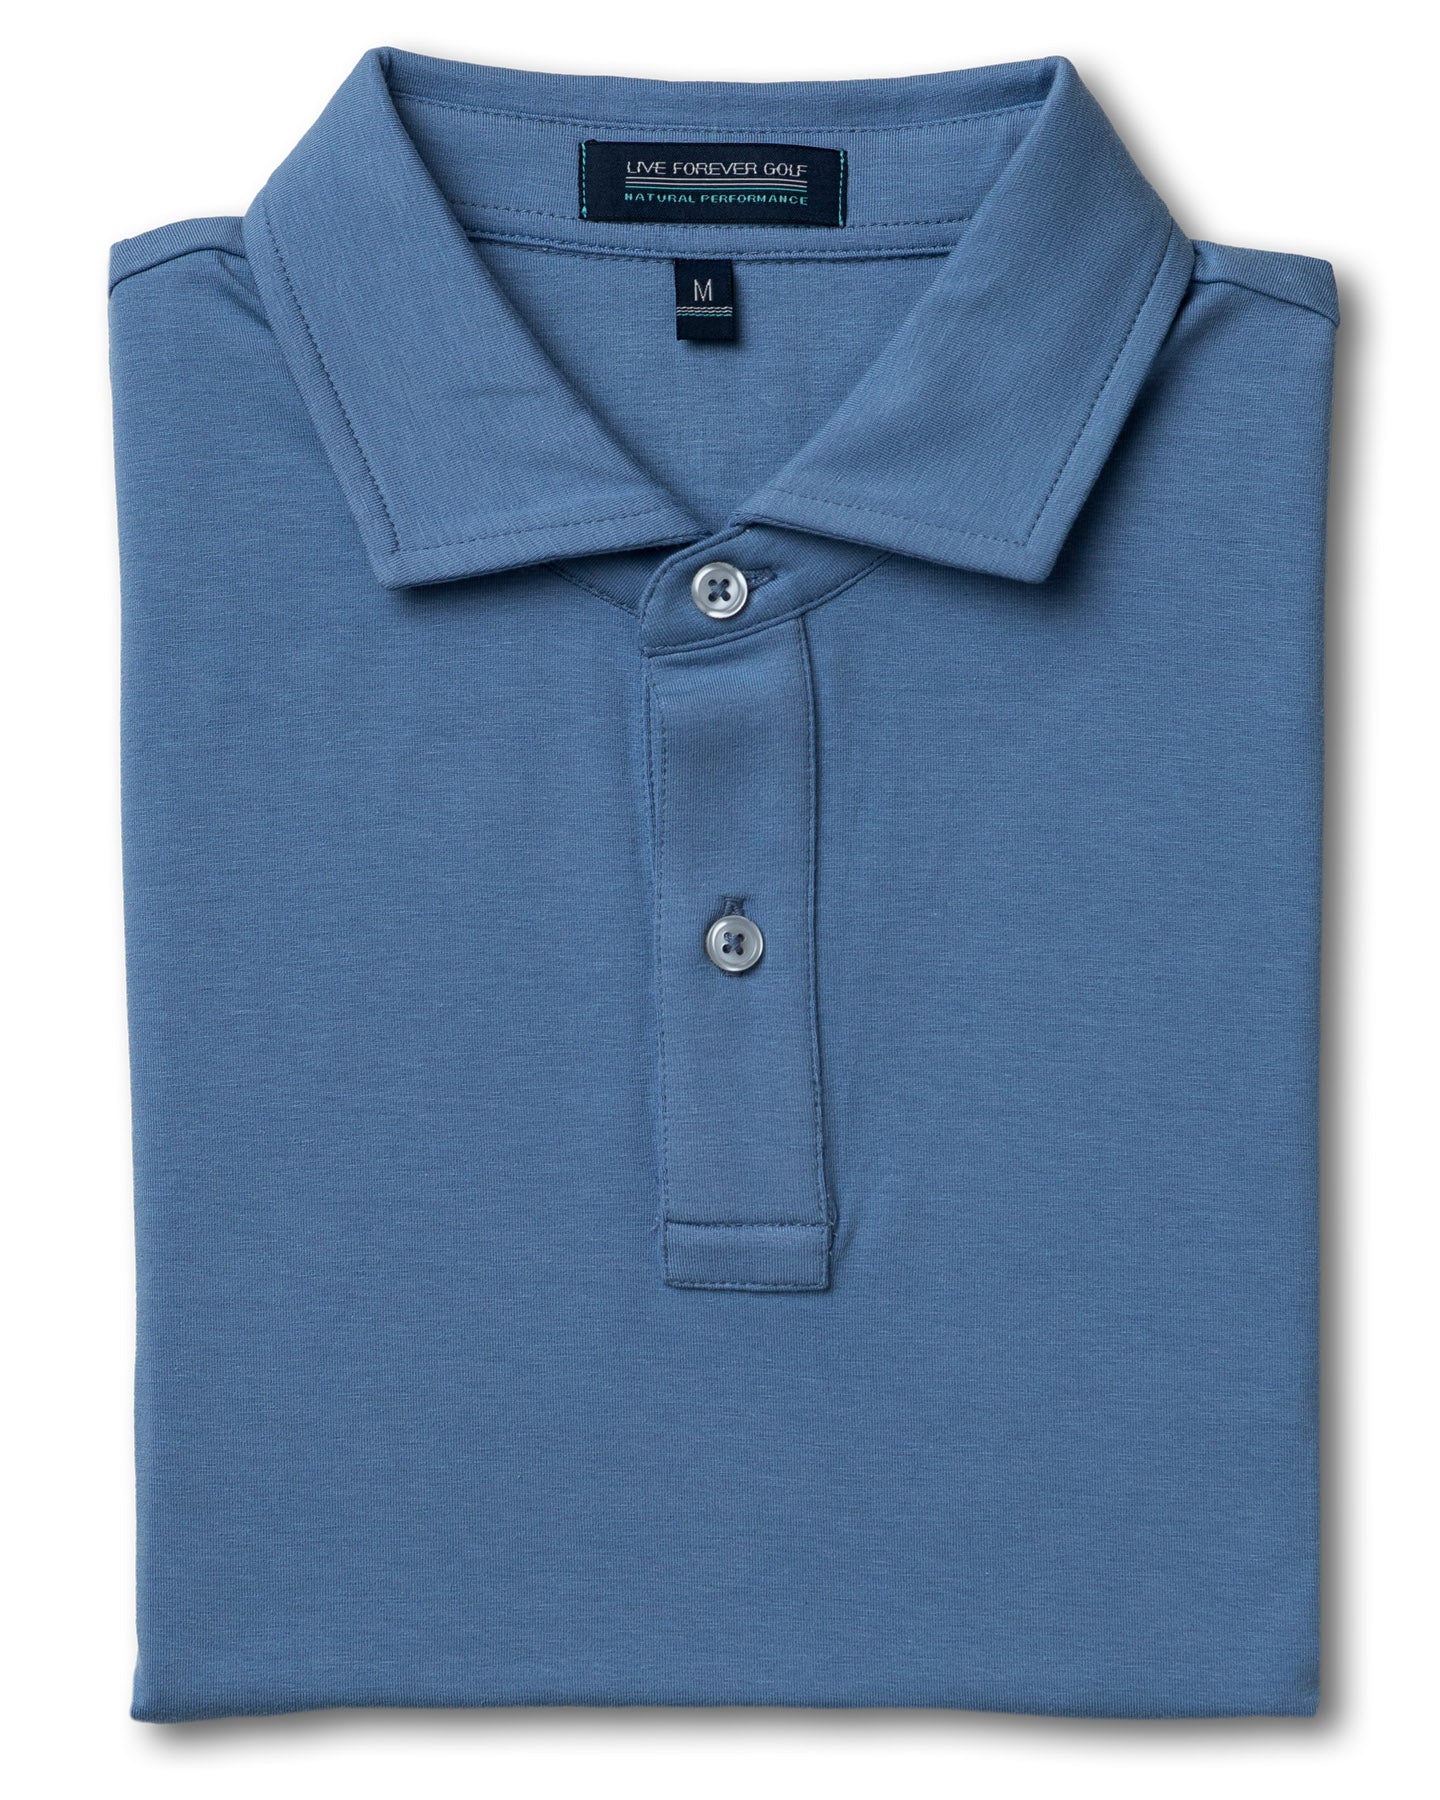 Soft Landing Natural Performance Golf Polo - Solids – Live Forever Golf